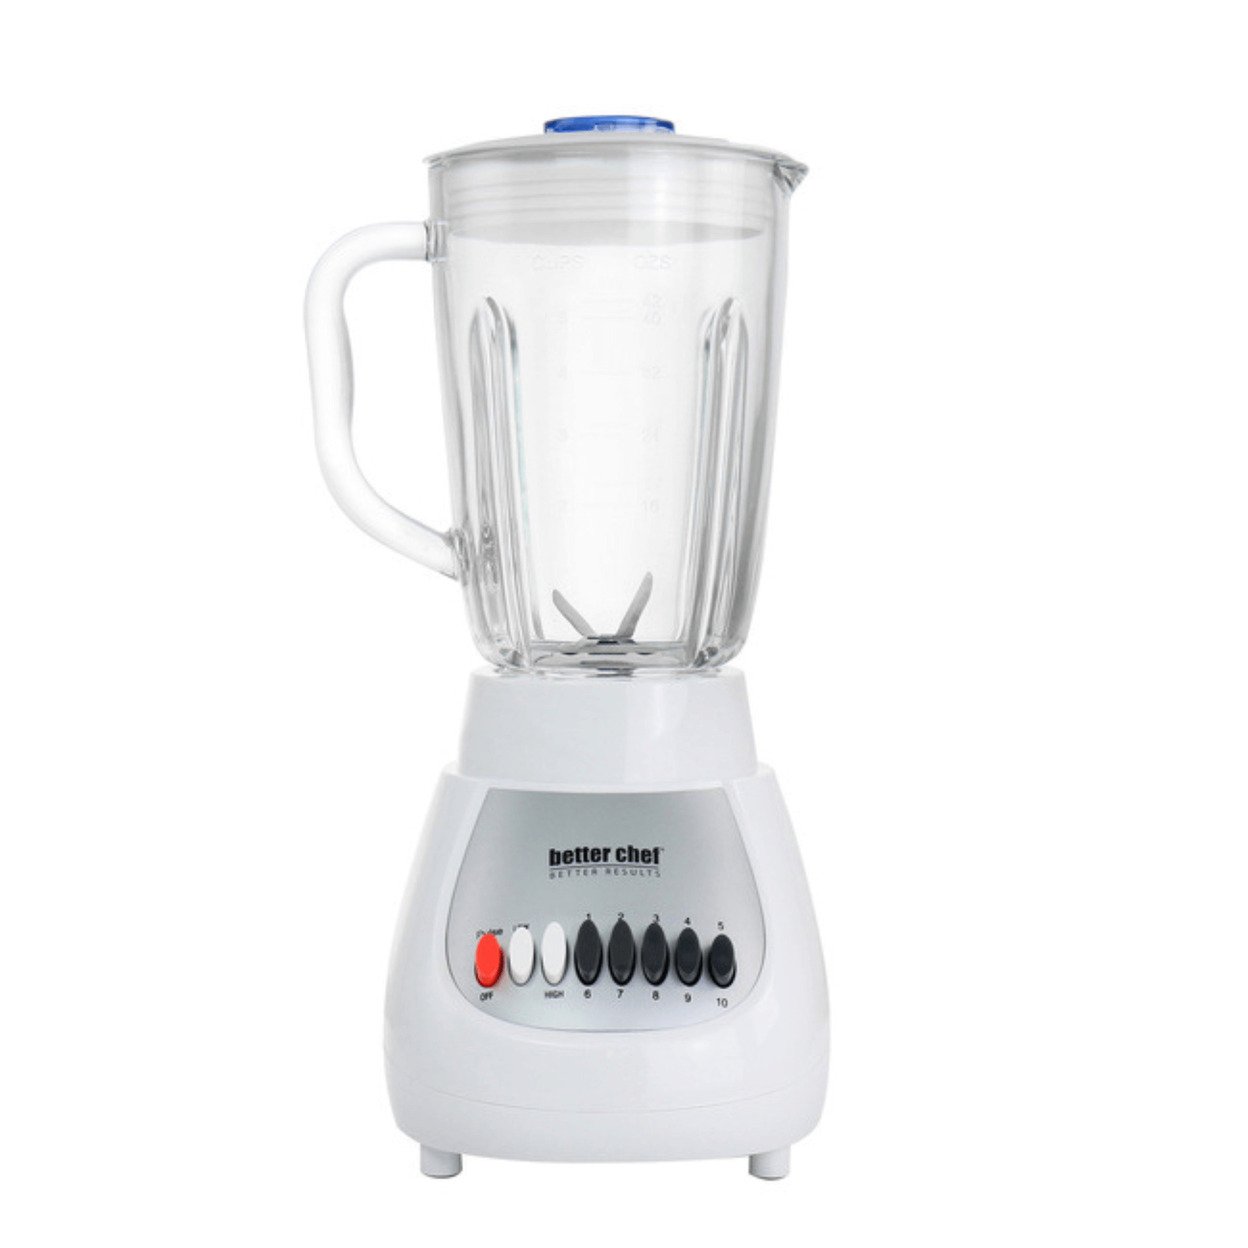 Better Chef   Classic 10-Speed 5-Cup Glass Jar Blender